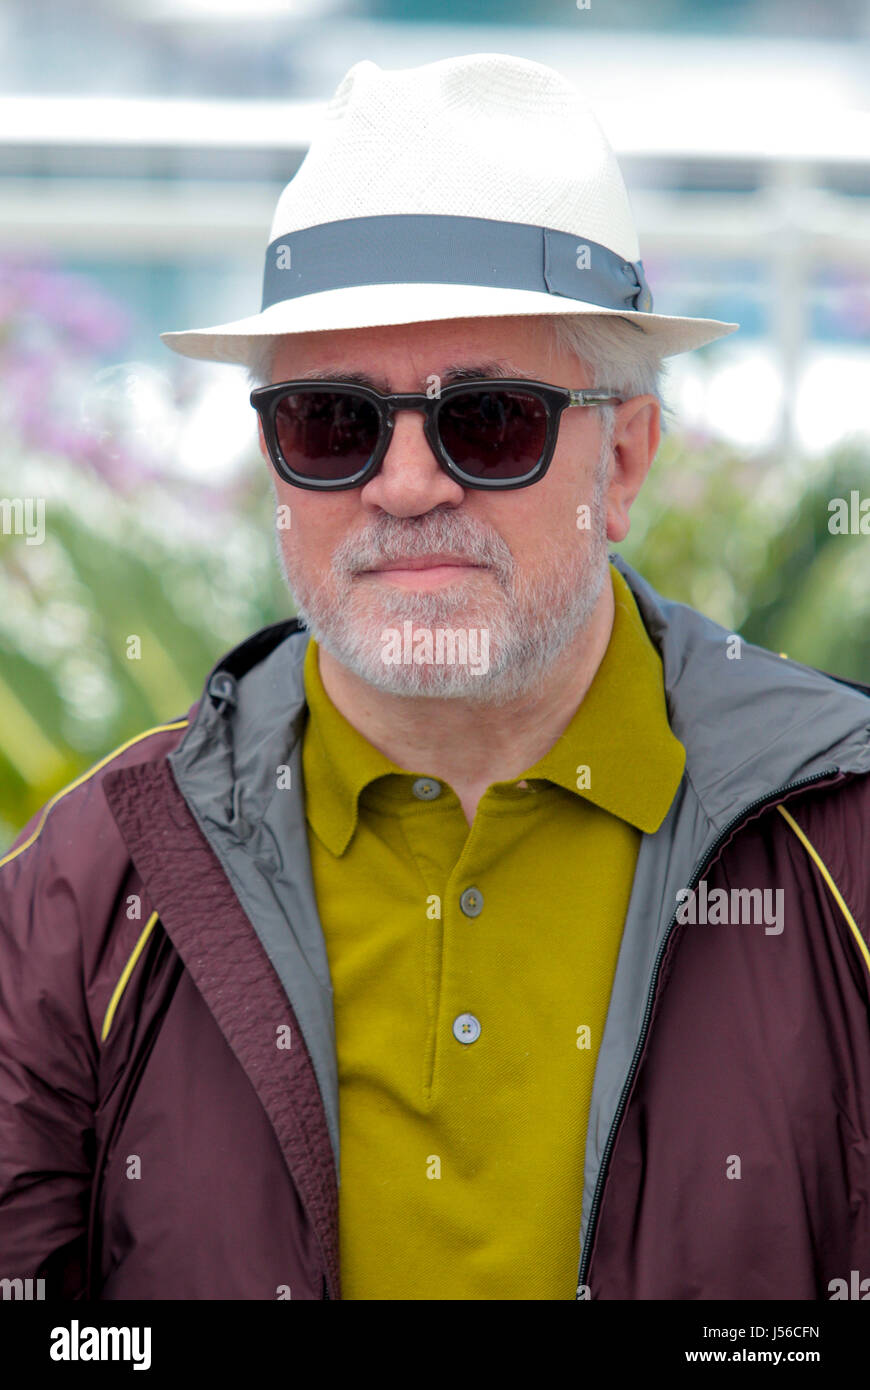 Pedro Almodovar Diretcor The Jury, Photocall. 70th Cannes Film Festival Cannes, France. 17th May, 2017. Diy98982Credit: Allstar Picture Library/Alamy Live News Credit: Allstar Picture Library/Alamy Live News Stock Photo